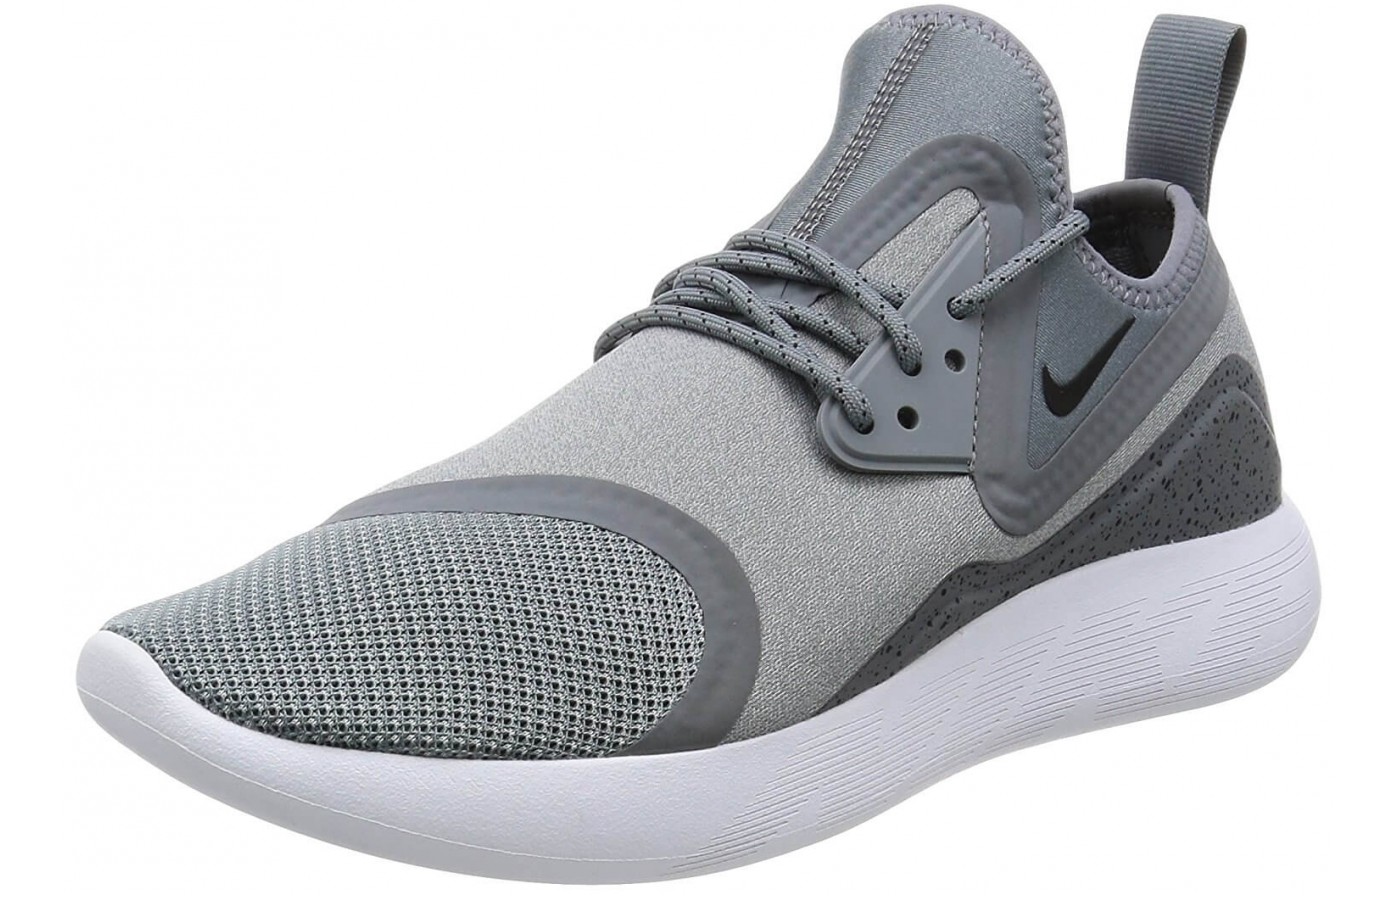 The ankle loop on the Nike LunarCharge Essential provides an easier time putting on these shoes.